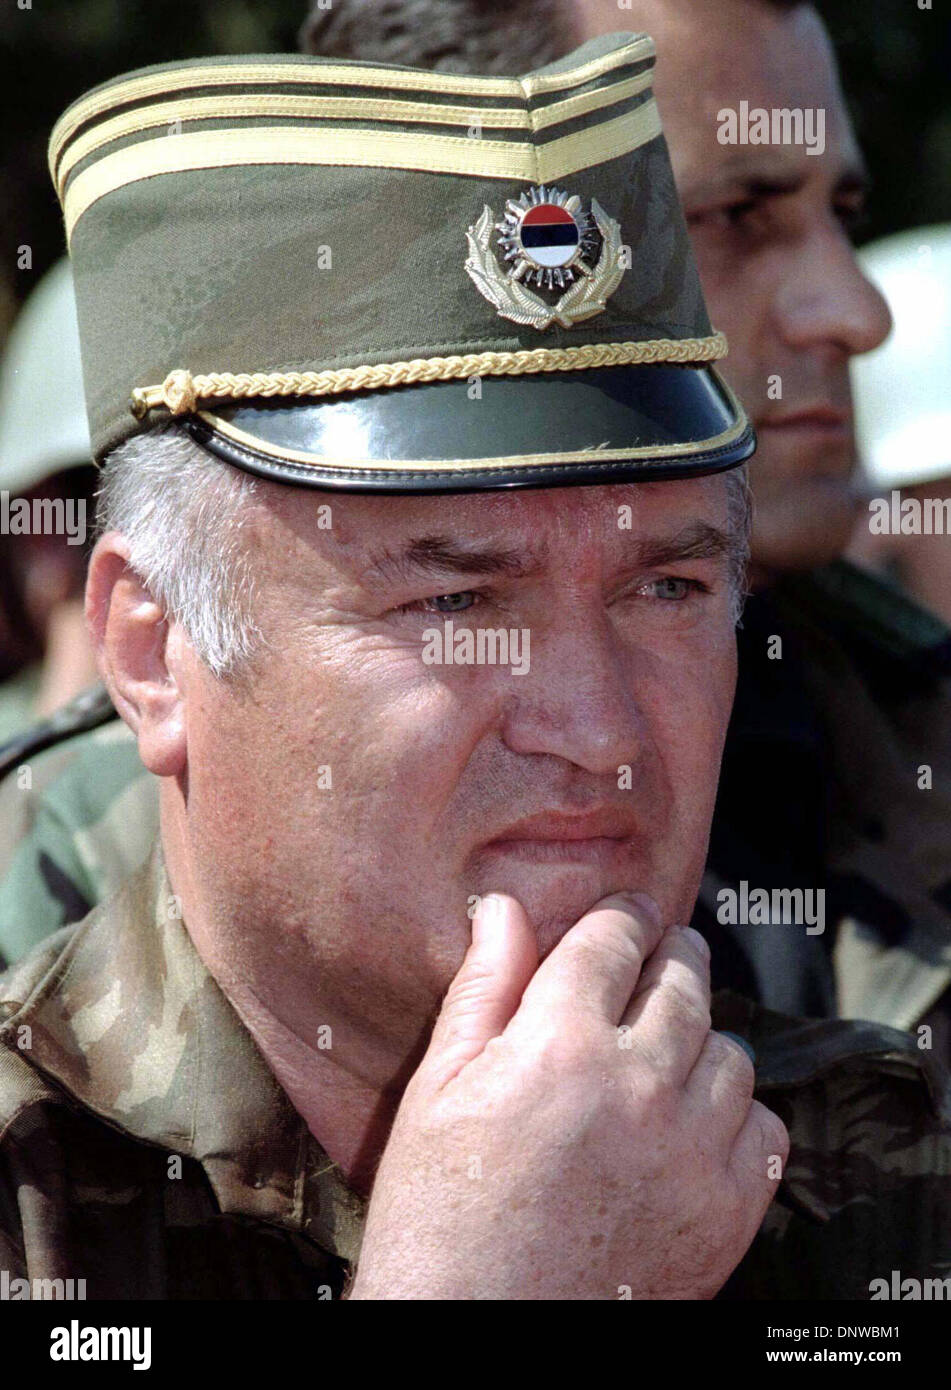 FILE PHOTO - Fugitive Bosnian Serb war crimes suspect RATKO MLADIC has been arrested in Serbia after 16 years on the run.  Mladic, 69, was found in the village of Lazarevo in northern Serbia where had been living under an assumed name. He faces charges over the massacre of at least 7,500 Bosnian Muslim men and boys at Srebrenica in 1995.  PICTURED:  Apr. 01, 1996 - Pale, Bosnia and Stock Photo